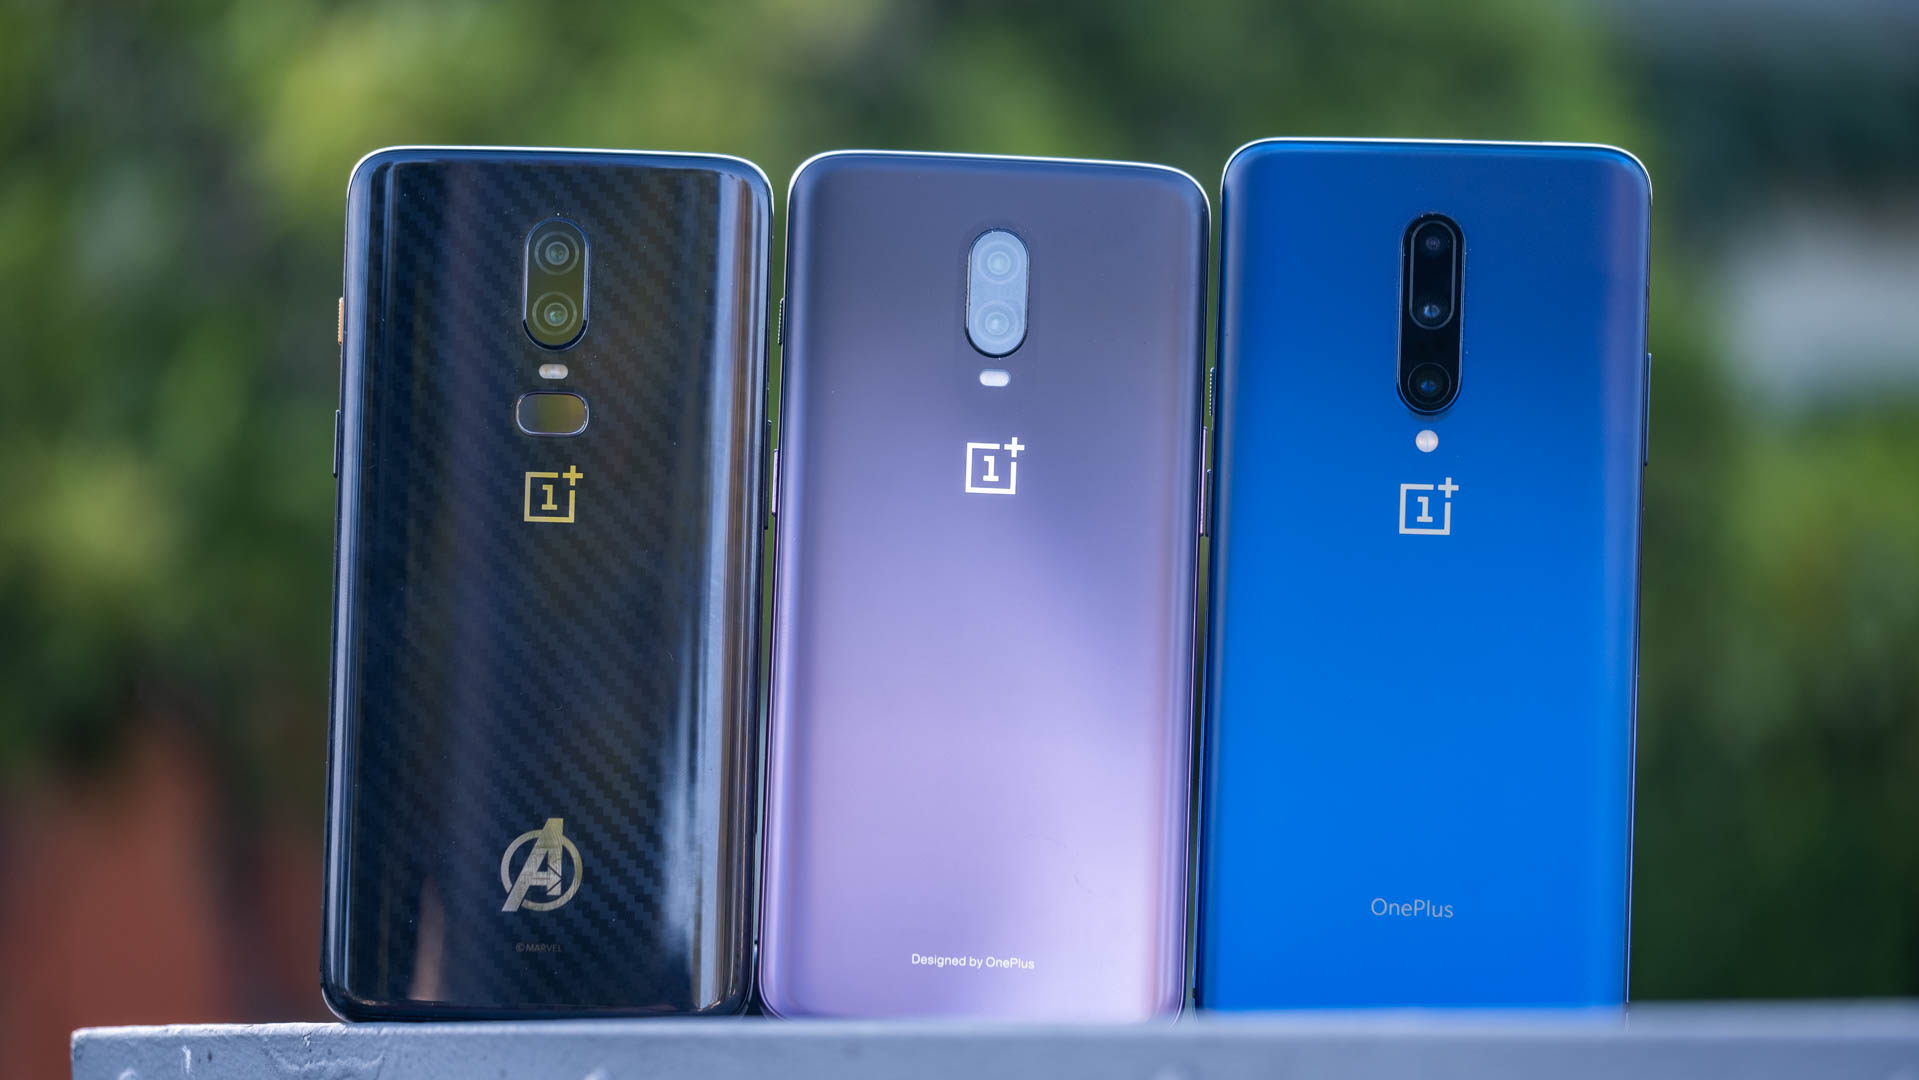 The back of the OnePlus 7 Pro, OnePlus 6T, and OnePlus 6 side by side.